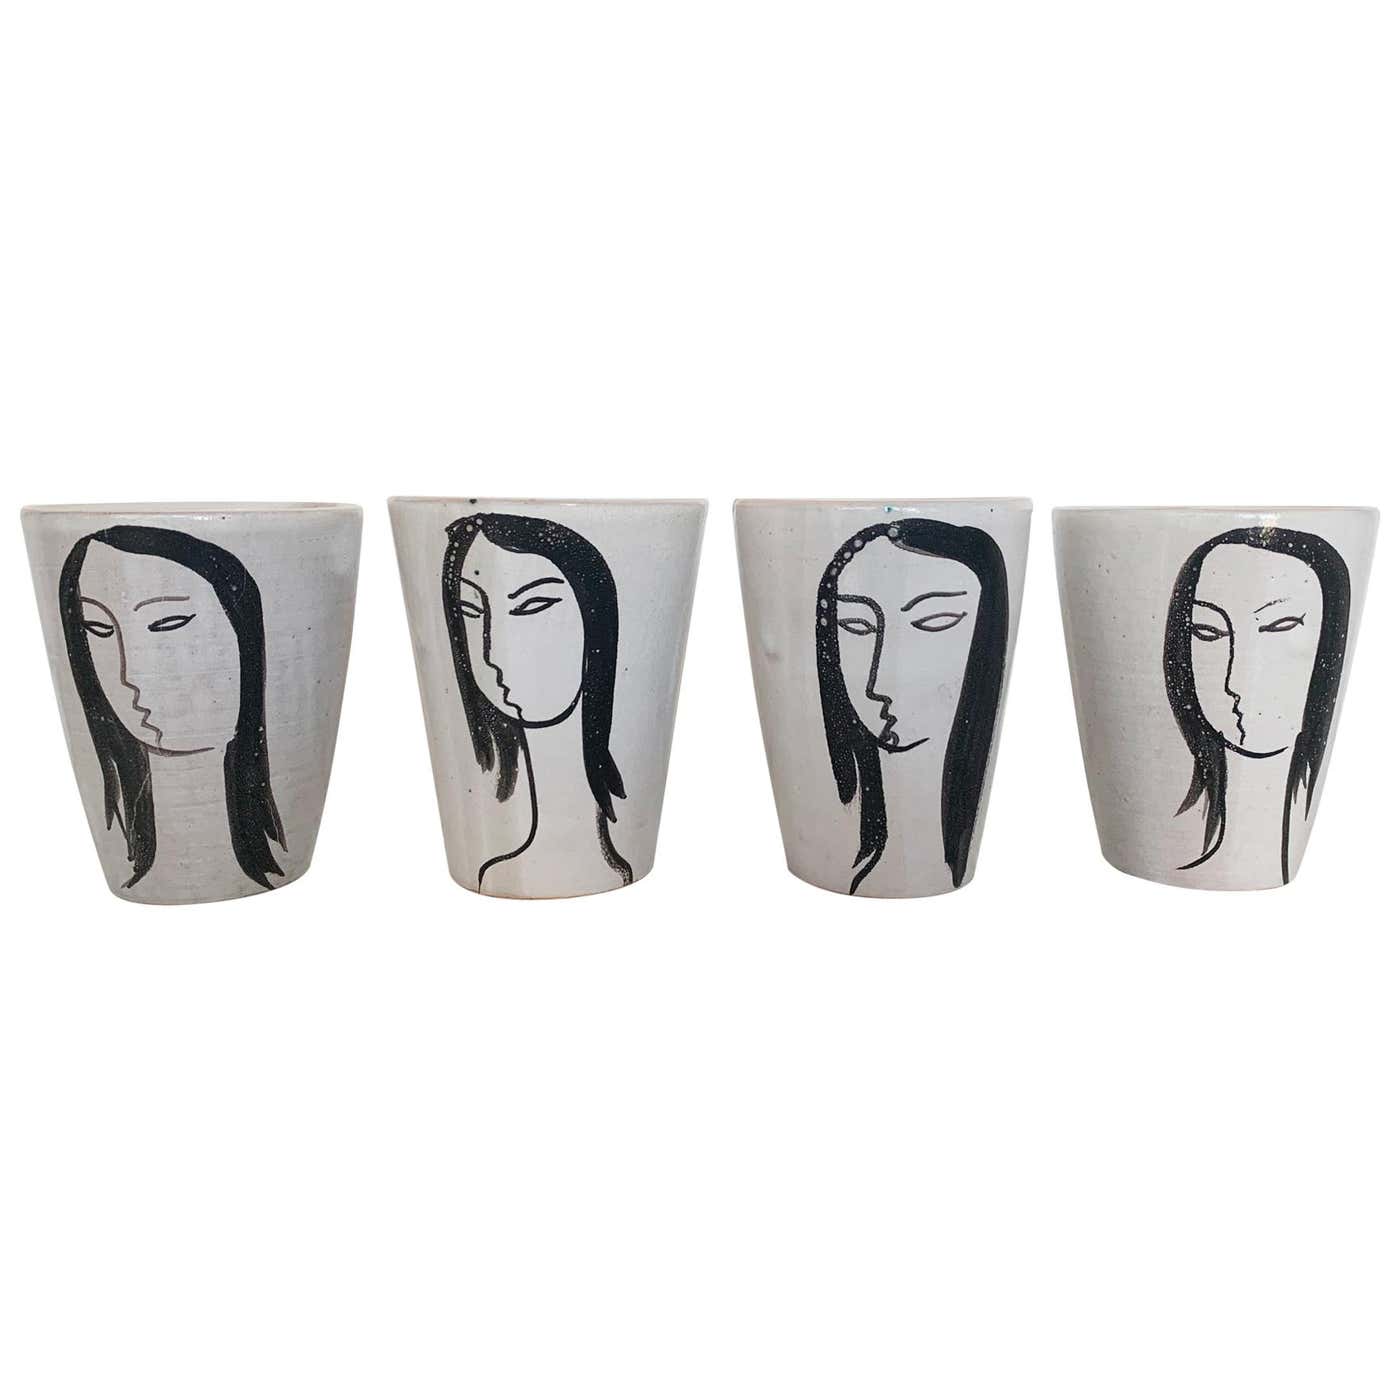 VALLAURIS, ATELIER DU GRAND CHENE Hand-painted Ceramic Cups, 1950s at ...